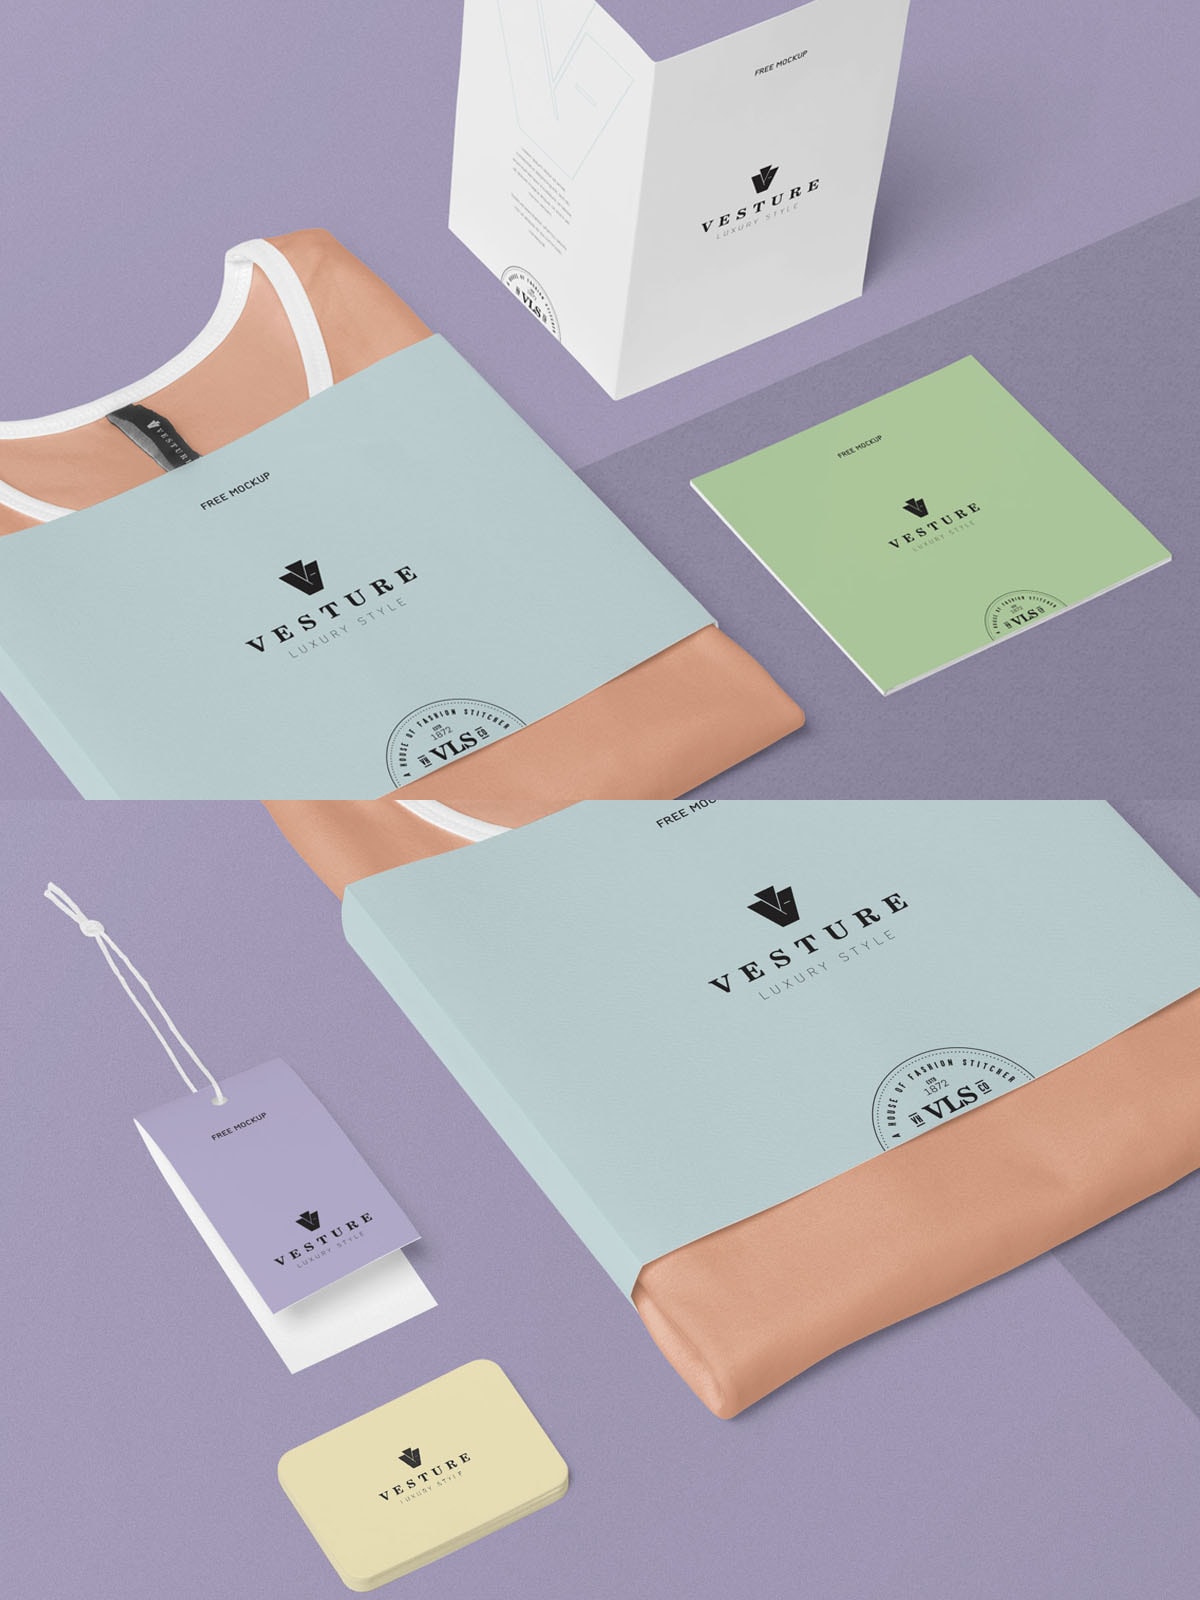 Download Free Fashion Branding Mockup Psd Find The Perfect Creative Mockups Freebies To Showcase Your Project To Life